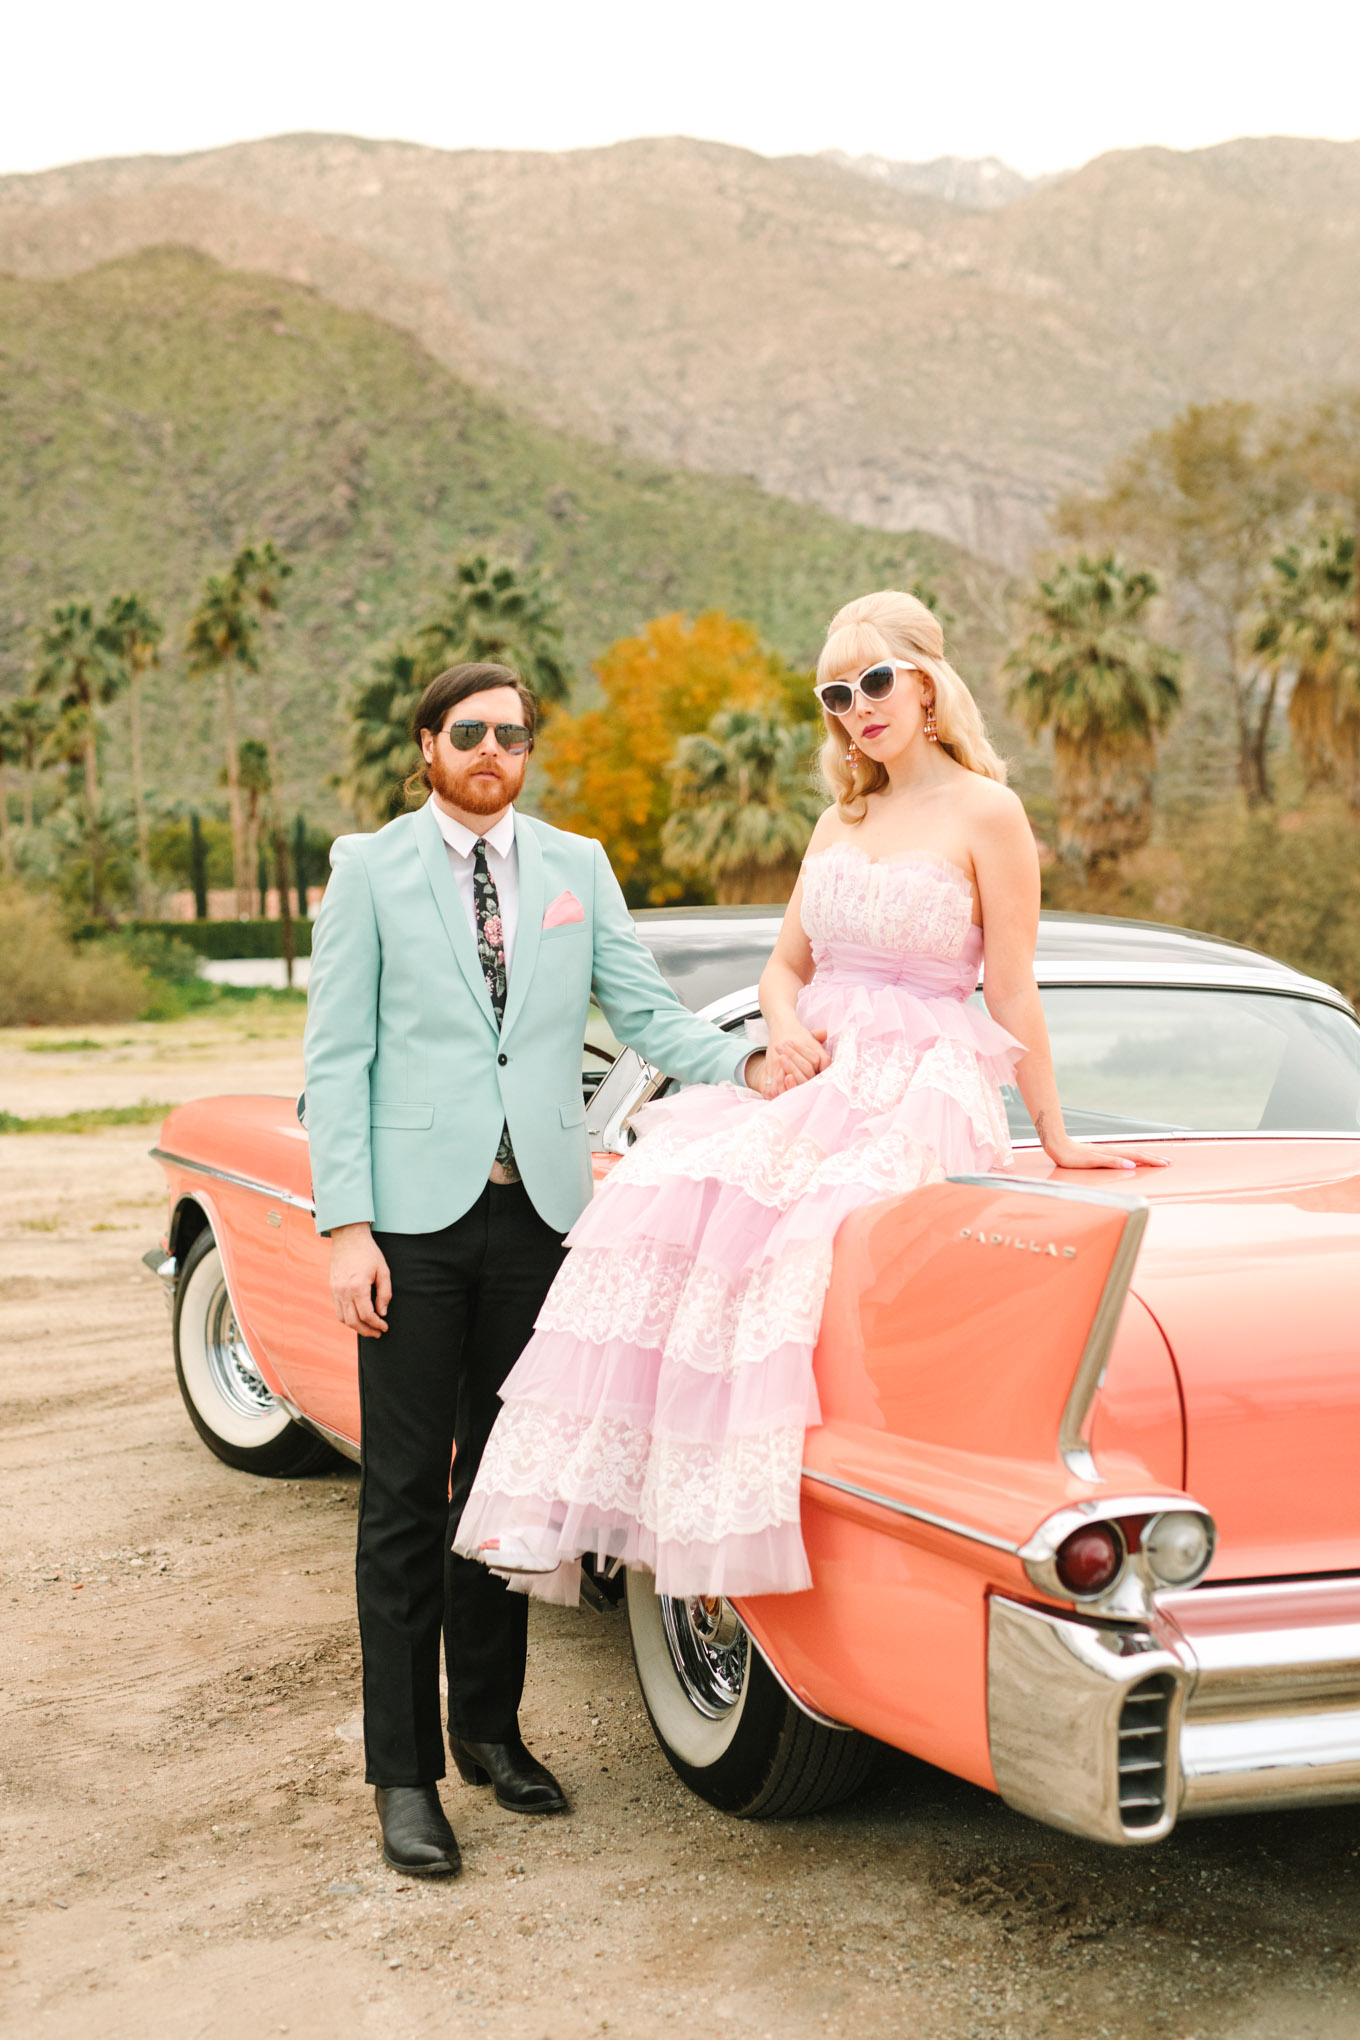 Bride and groom on the back of a retro car. Modern vintage-inspired Palm Springs engagement session with a 1960s pink Cadillac, retro clothing, and flowers by Shindig Chic. | Colorful and elevated wedding inspiration for fun-loving couples in Southern California | #engagementsession #PalmSpringsengagement #vintageweddingdress #floralcar #pinkcar   Source: Mary Costa Photography | Los Angeles